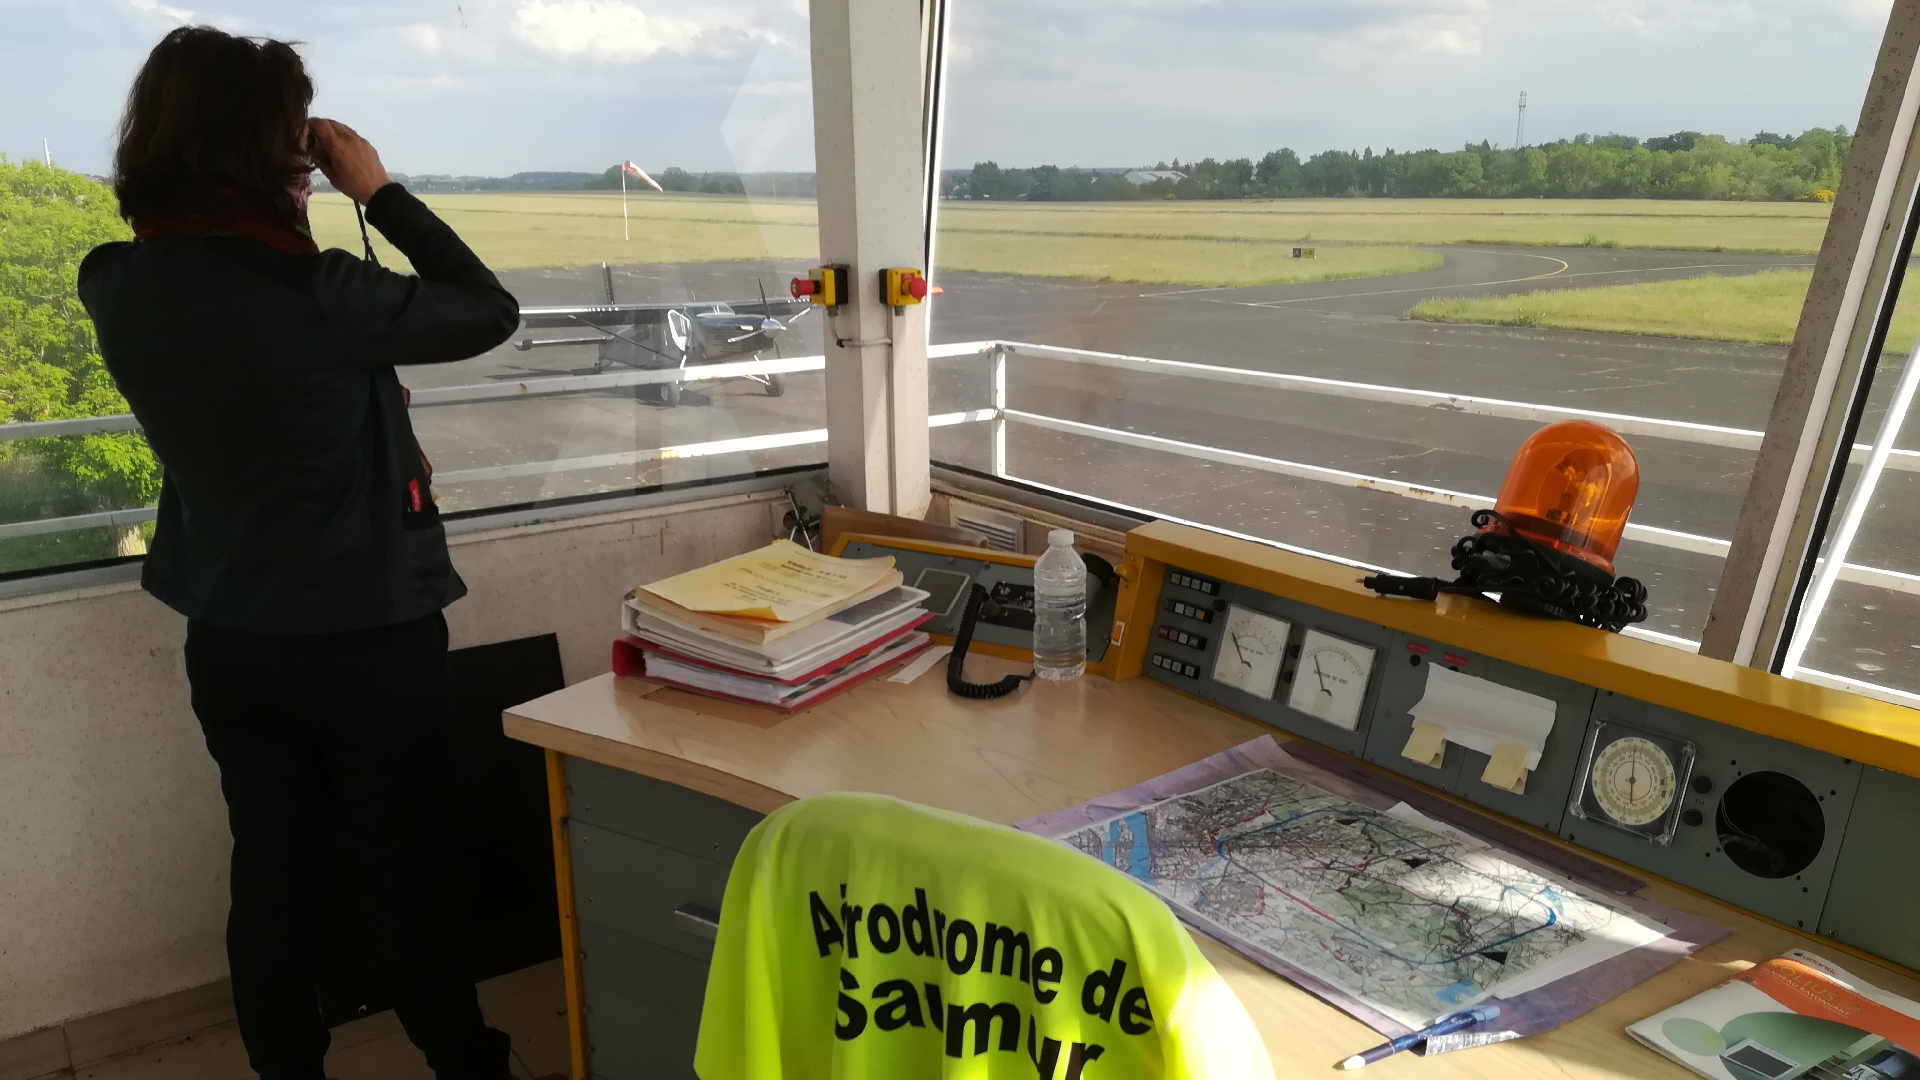 View over tarmac and runway from control tower Saumur LFOD